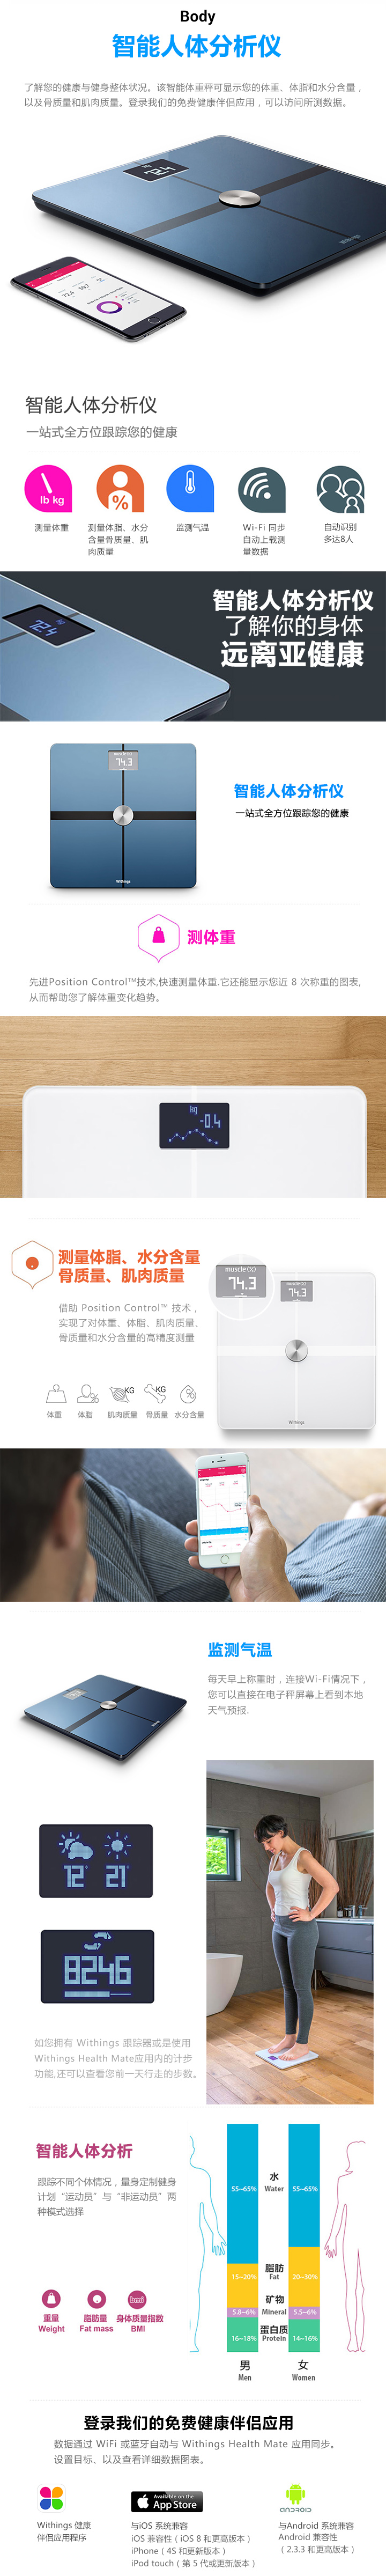 Withings Body智能体重秤免费试用,评测